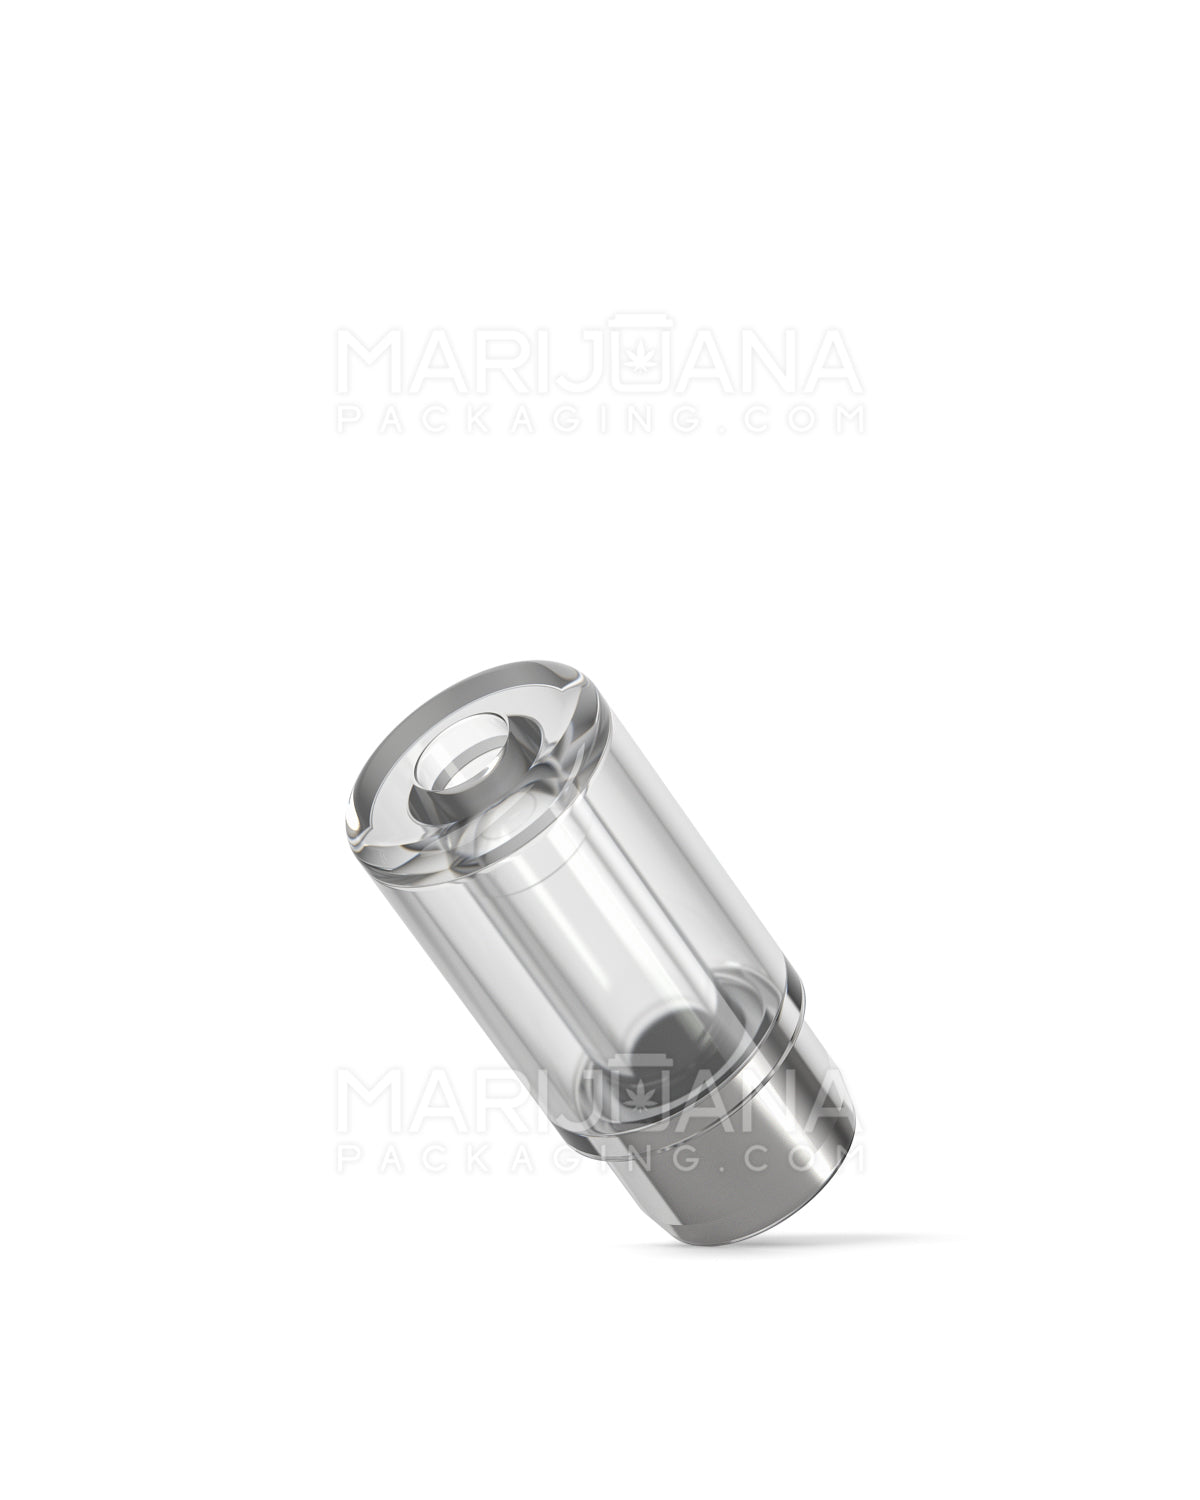 AVD | Barrel Vape Mouthpiece for GoodCarts Plastic Cartridges | Clear Plastic - Press On - 600 Count - 4